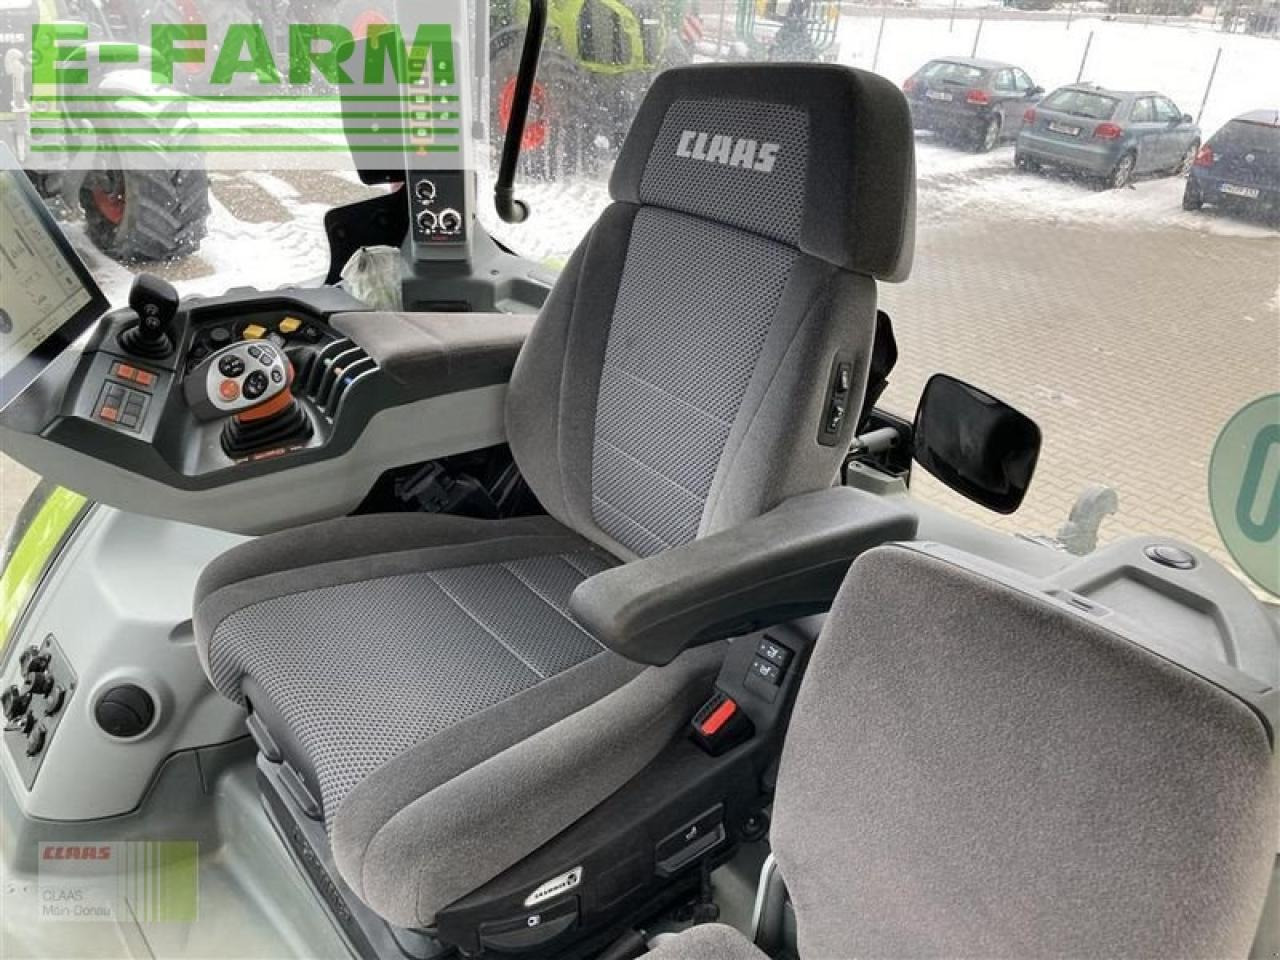 Tracteur agricole CLAAS arion 660 cmatic - st v first